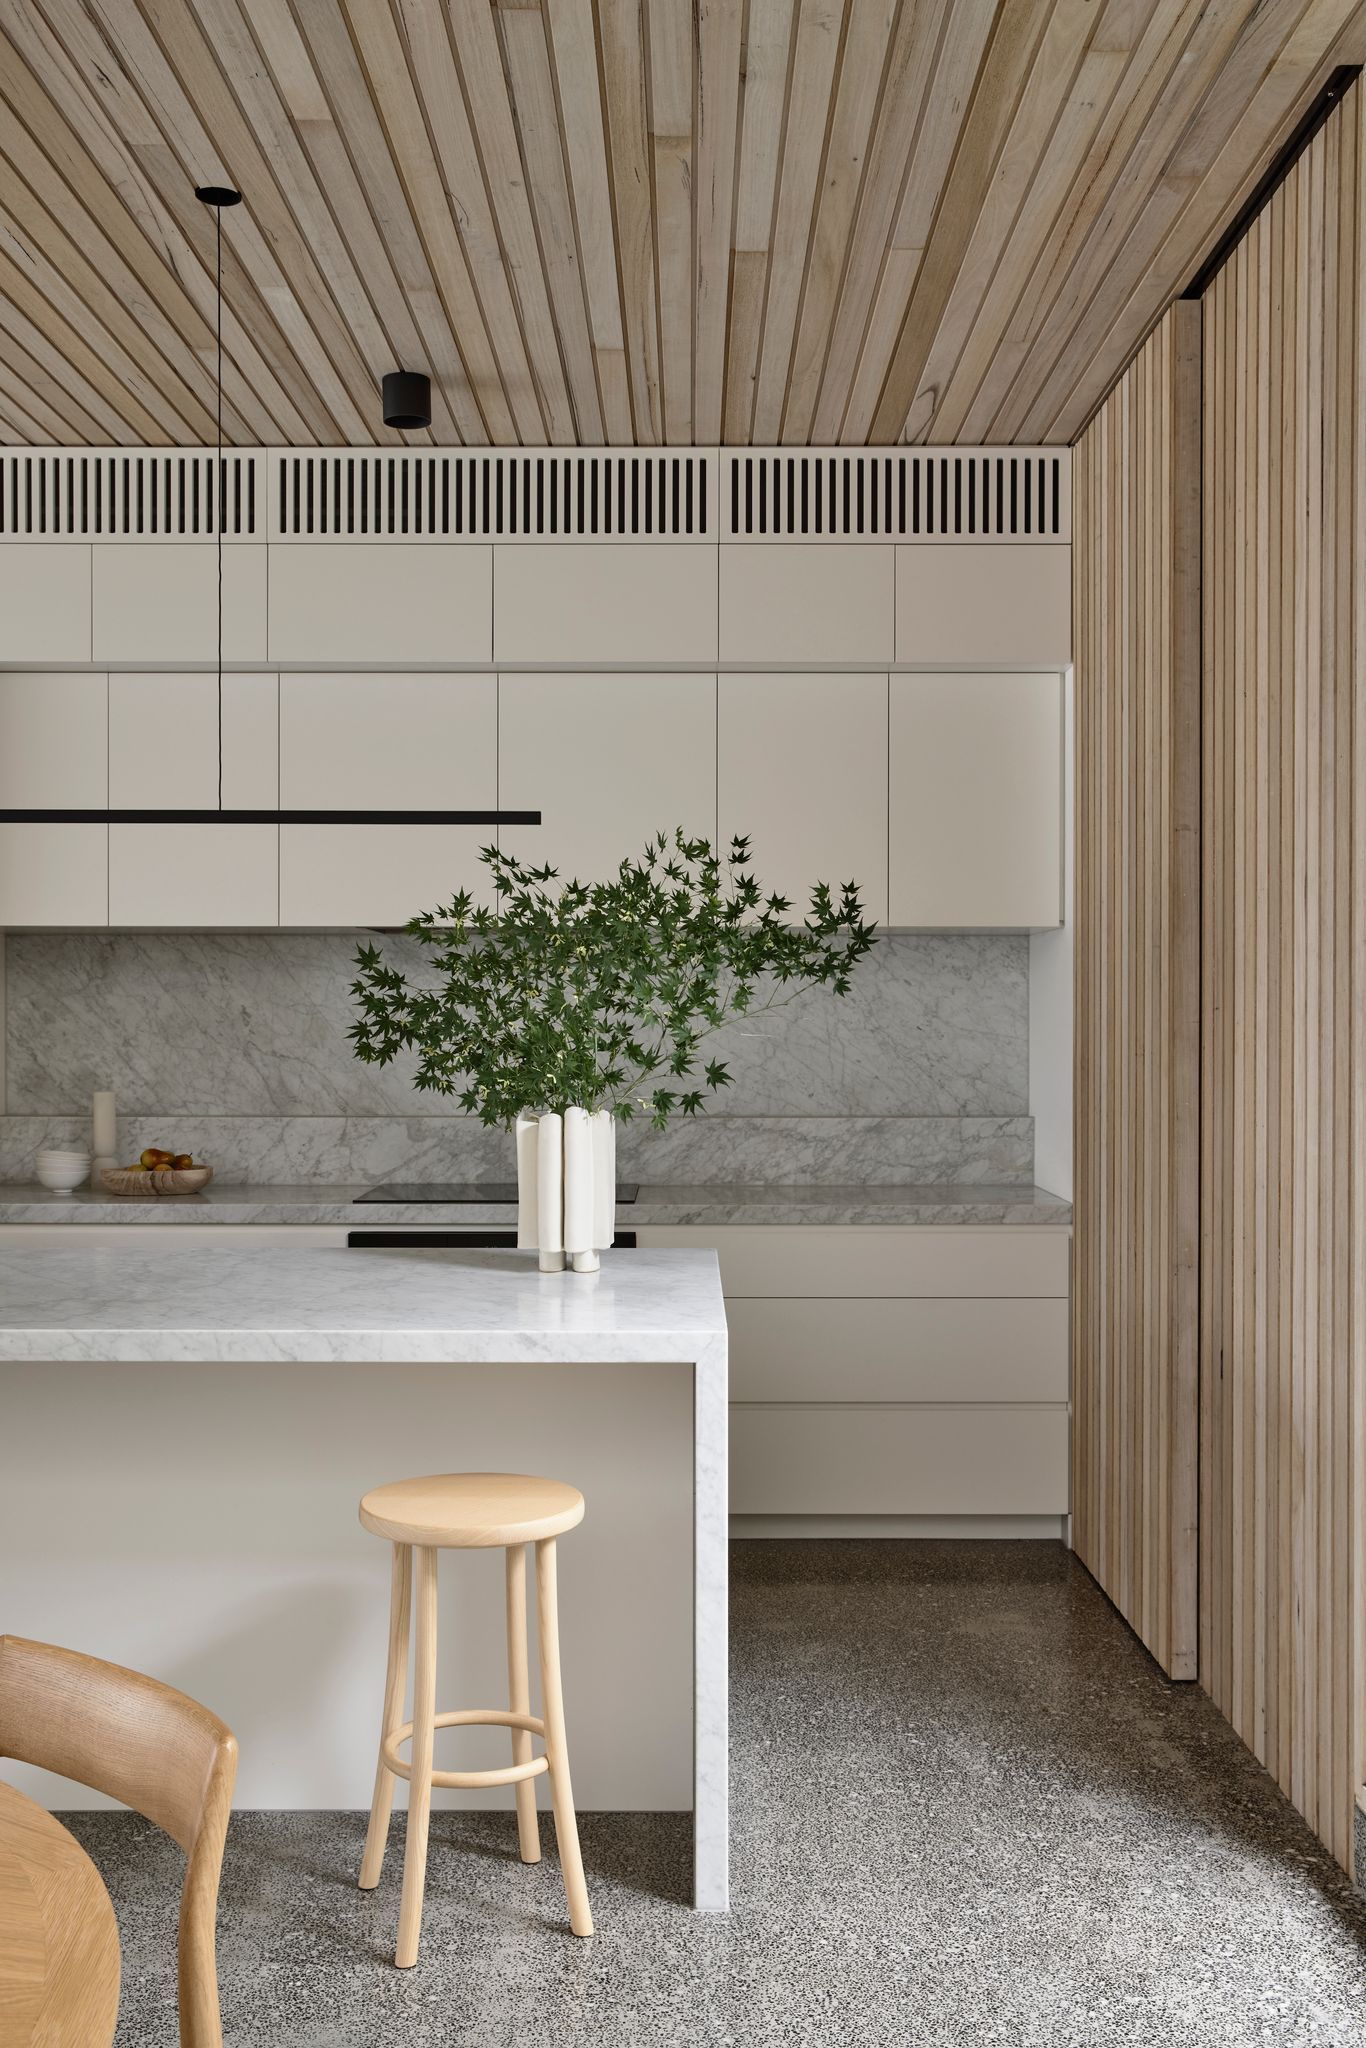 Silvertop House by Tom Robertson Architects. Detailed view of kitchen